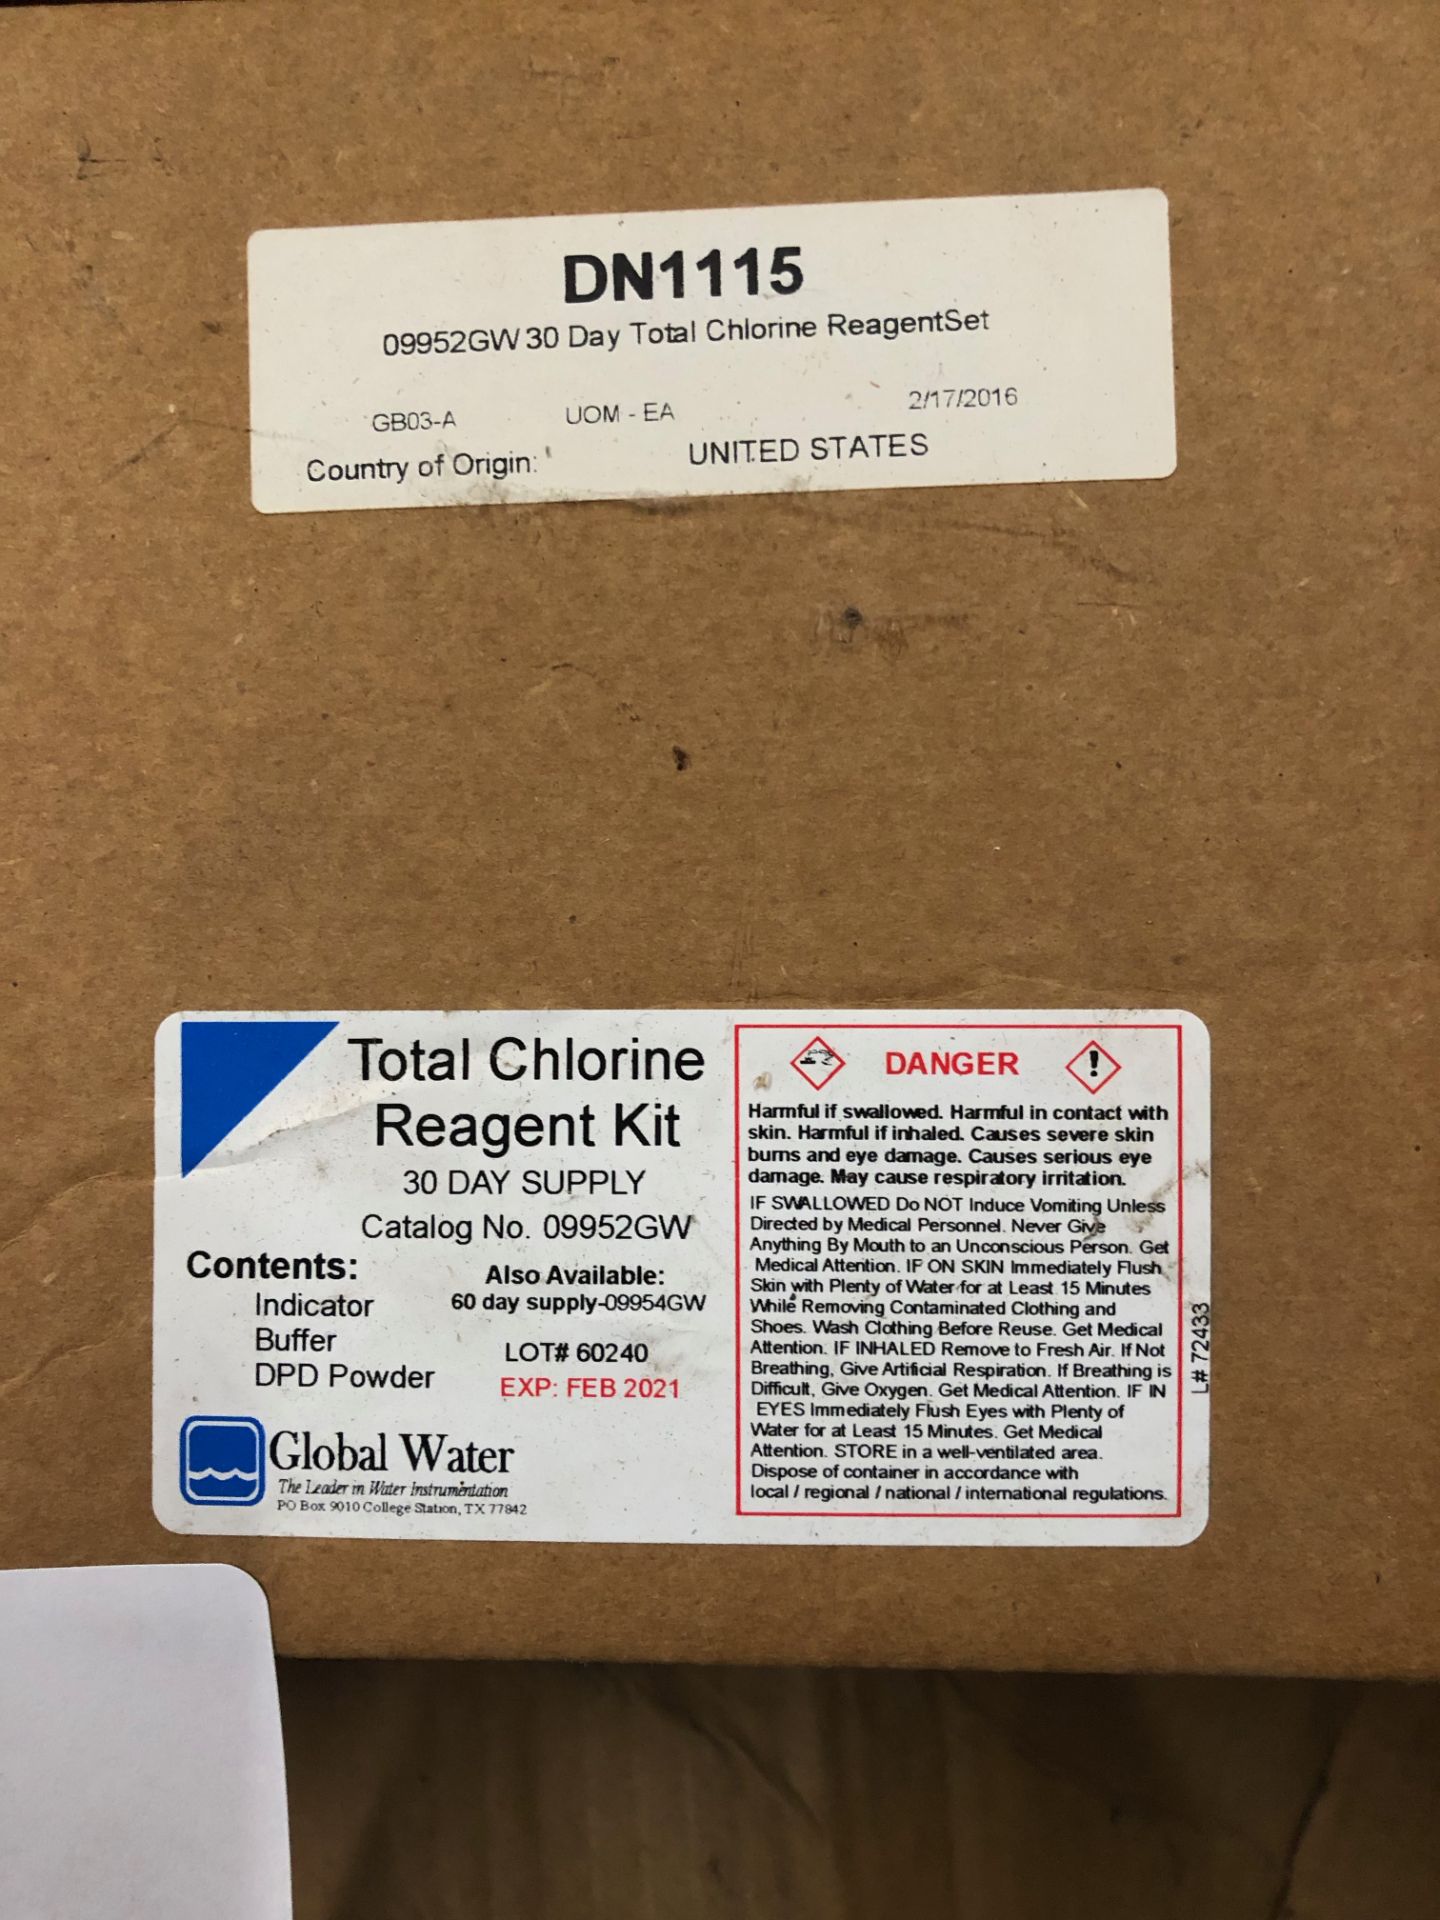 Global Water Total Chlorine Reagent Kit Cat # 09952GW 30 Day Supply including Indicator, Buffer & - Image 2 of 2